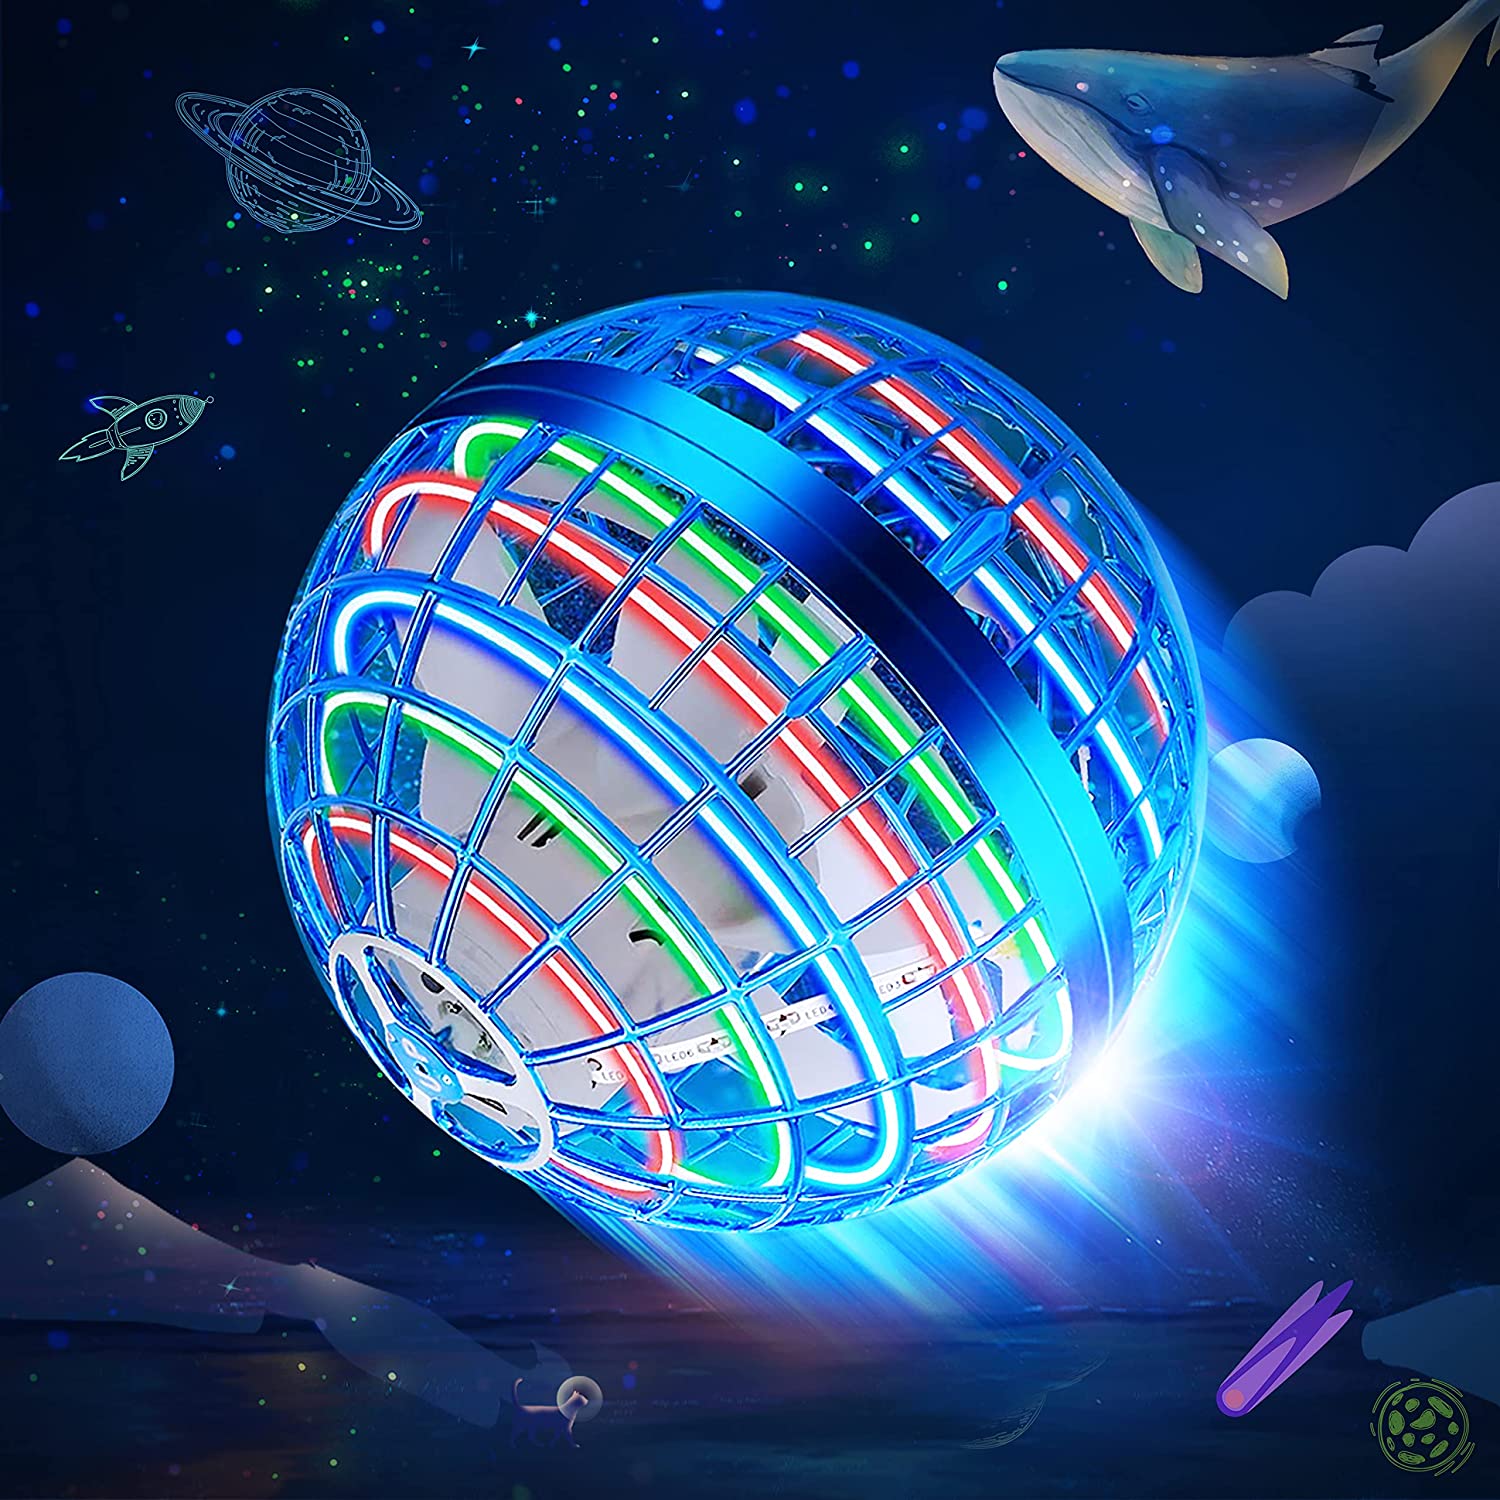 Nacai Flying Ball Toys, Floating Orb Ball Flying Toy, Magic Cosmic Orbs Led Lights Hover Ball Infinity Flying Orb Boomerang Drone Ball for Kids - Blue